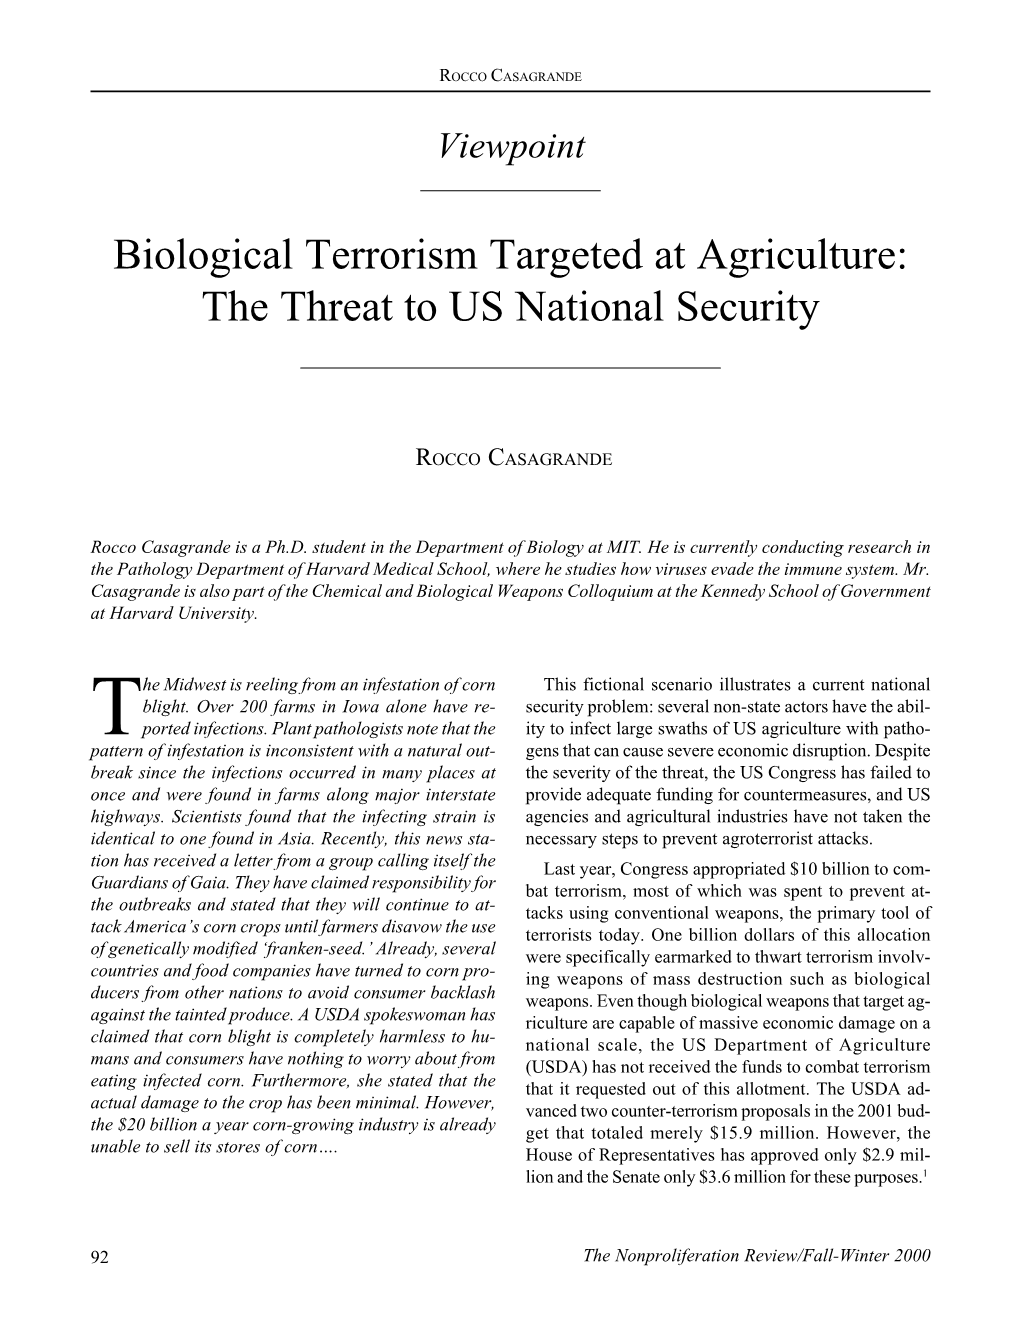 Biological Terrorism Targeted at Agriculture: the Threat to US National Security